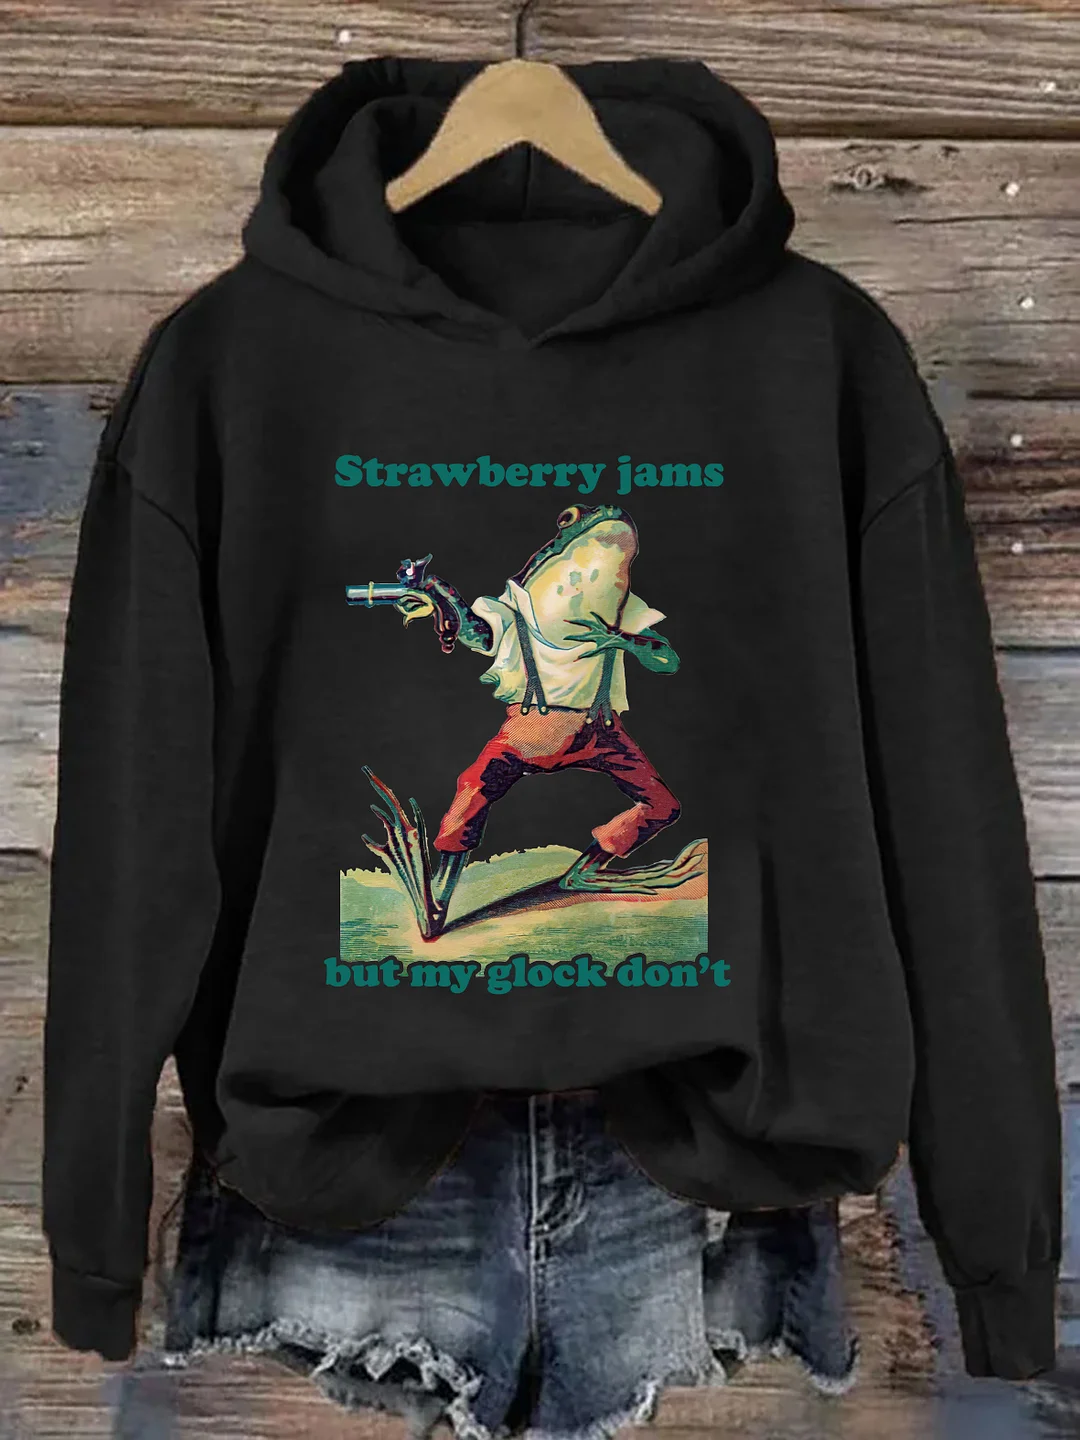 Strawberry Jams But My Glock Don't Hoodie